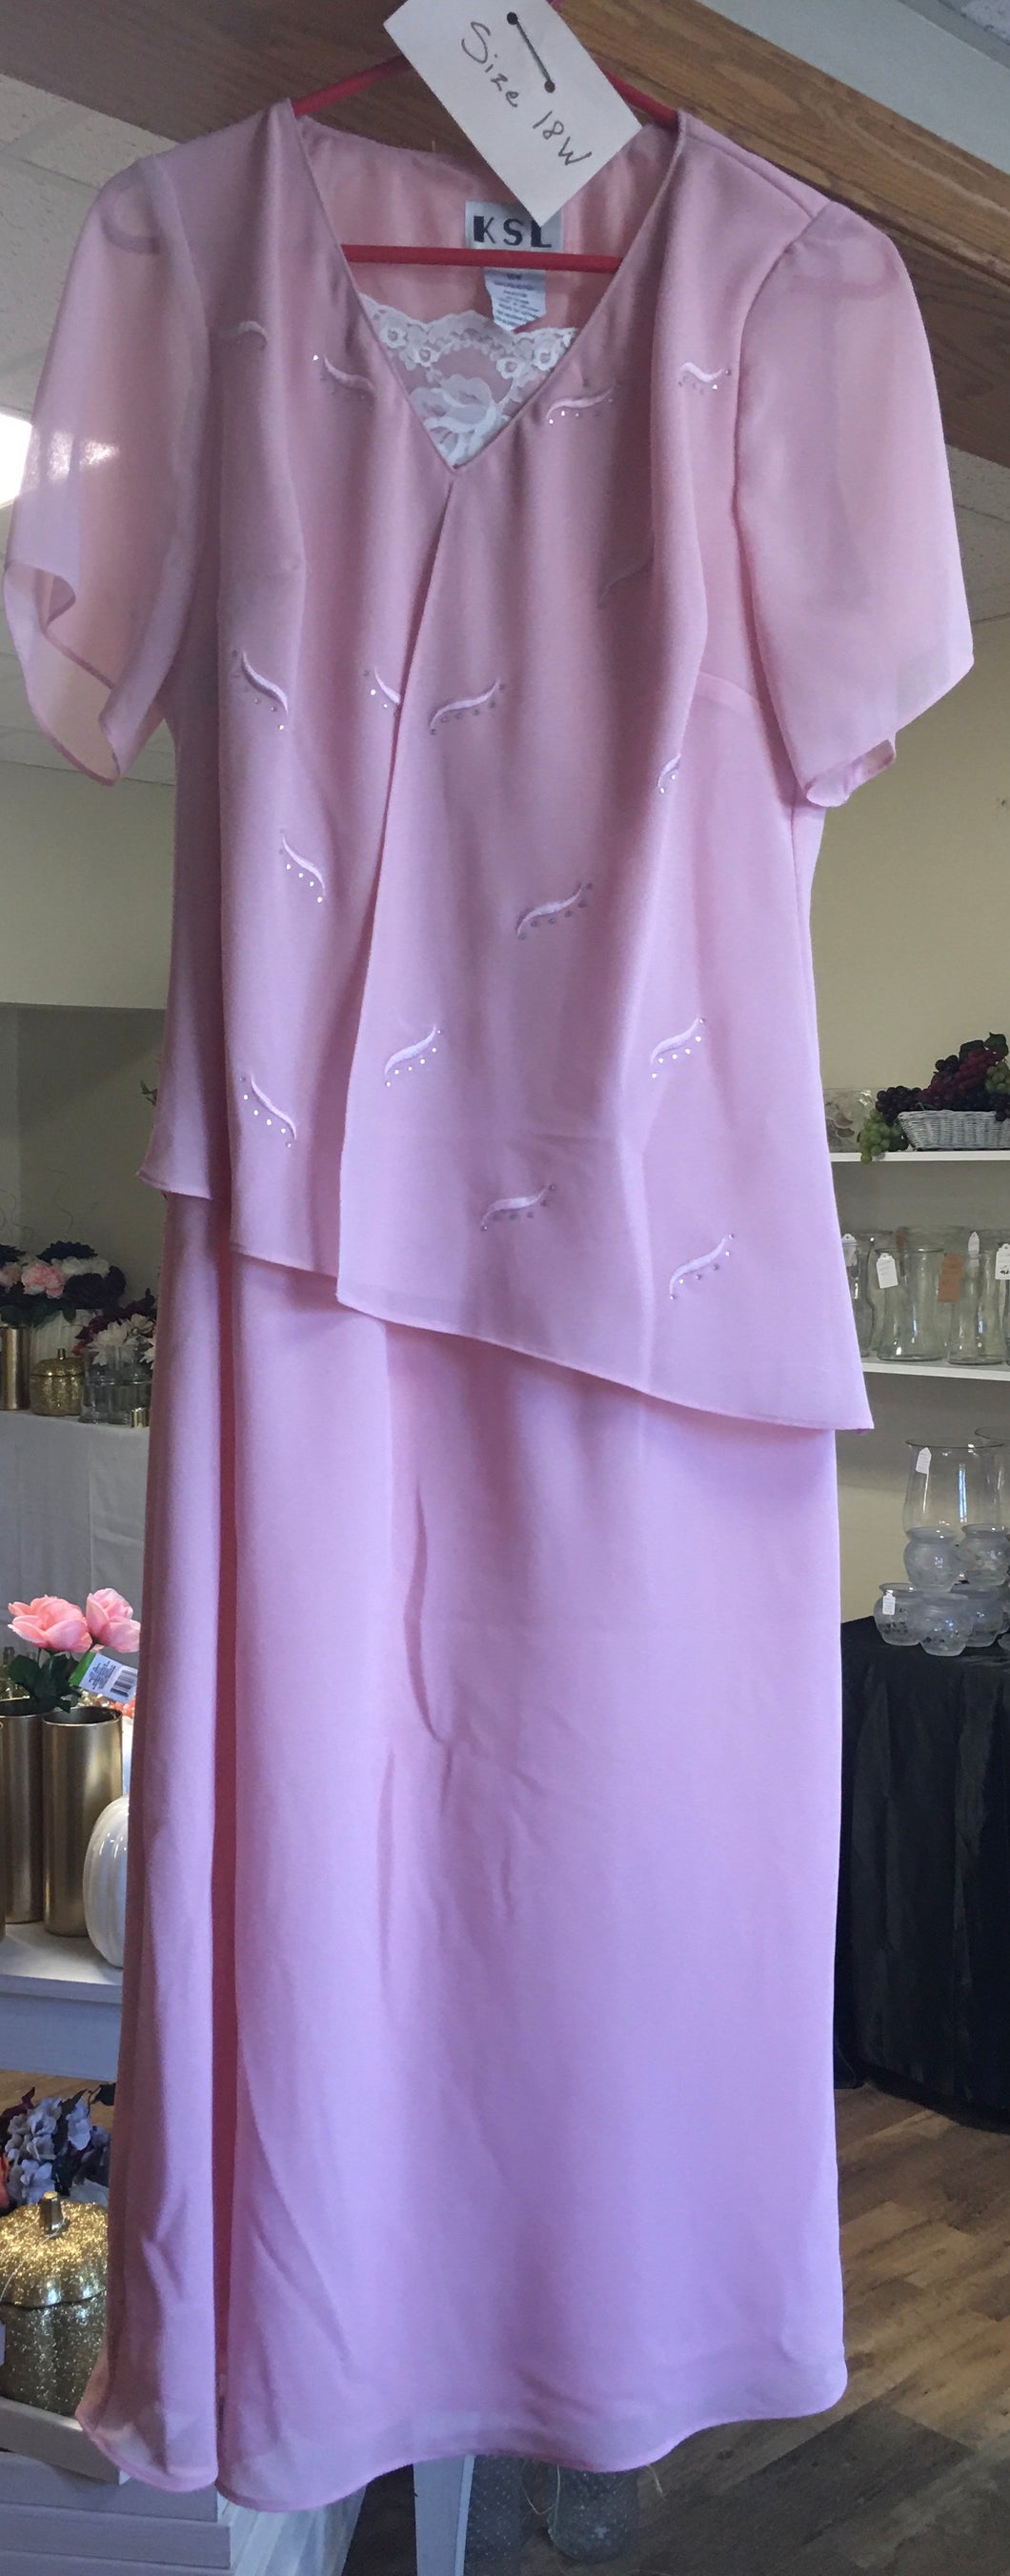 MCGU200-I “Mother’s” Pink Gown, Size 18W